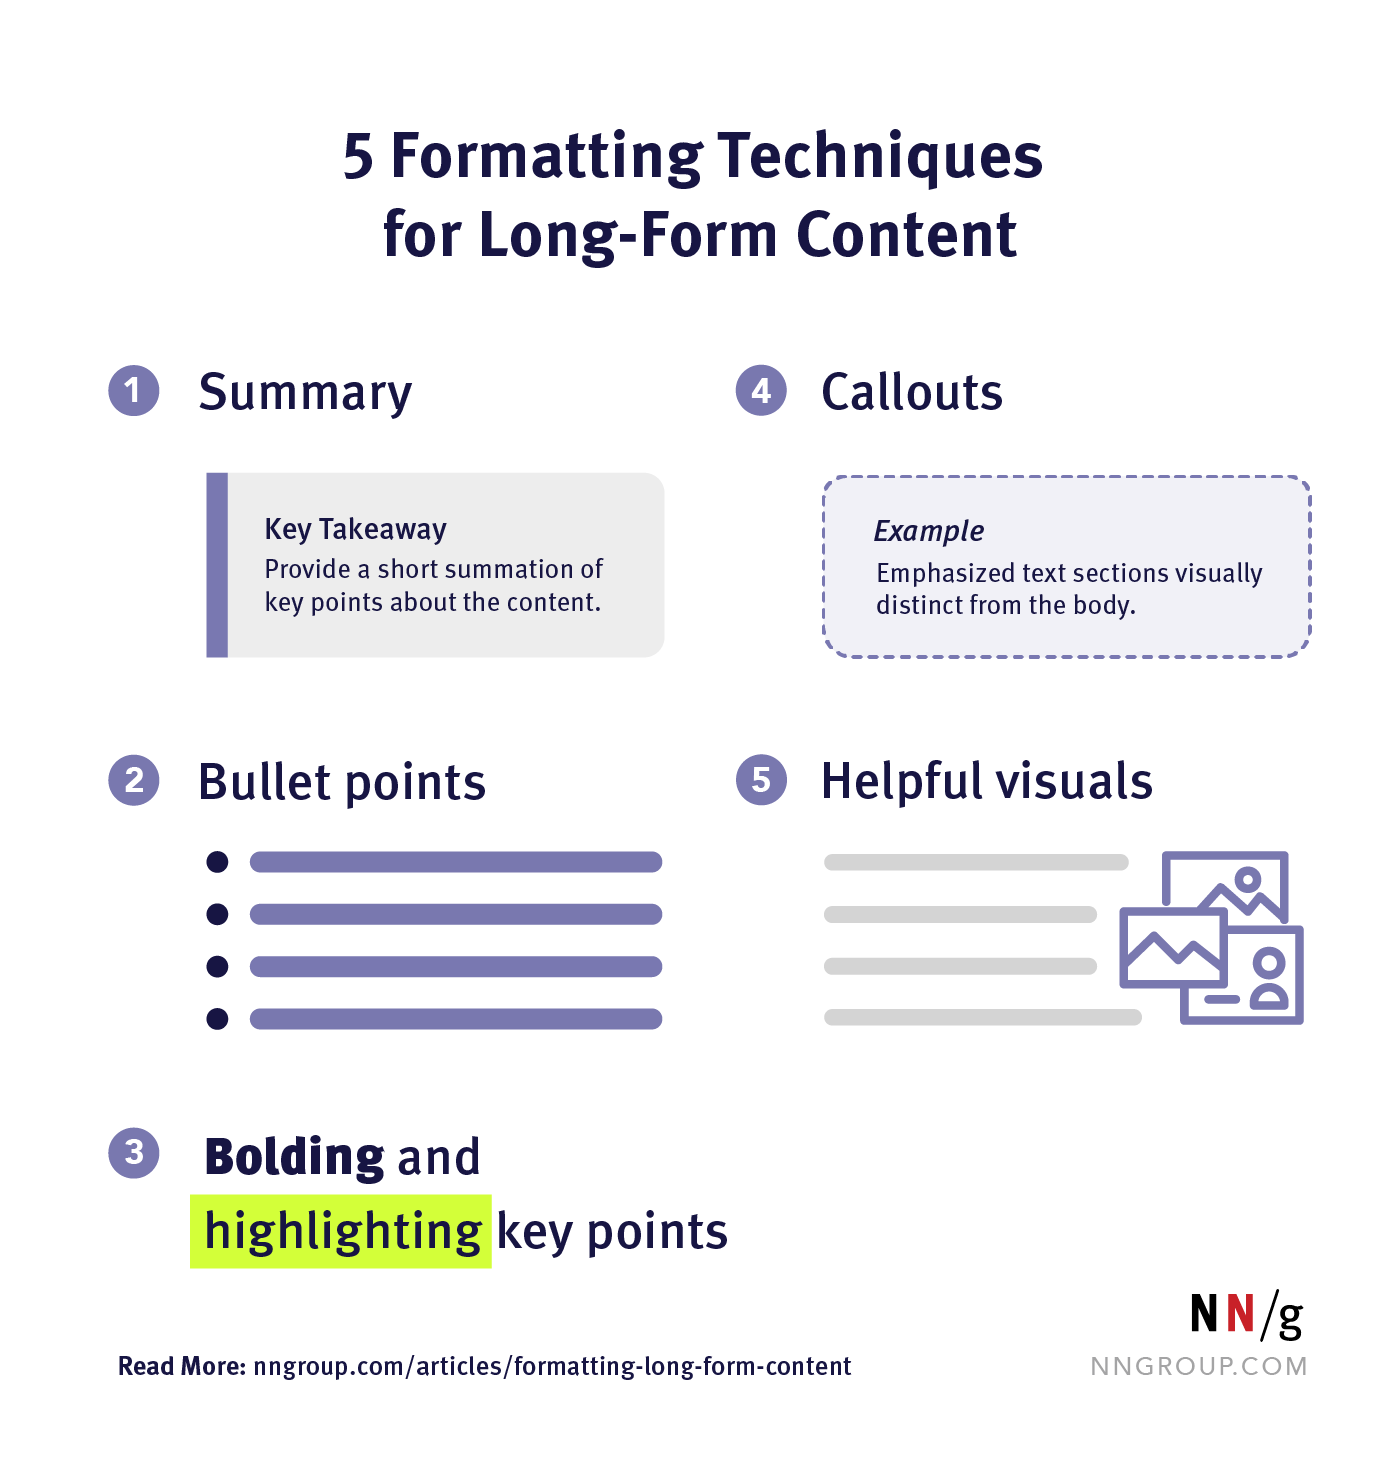 An illustration of the 5 text formatting techniques: summary, bullet points, bolding and highlighting, callouts and helpful visuals.